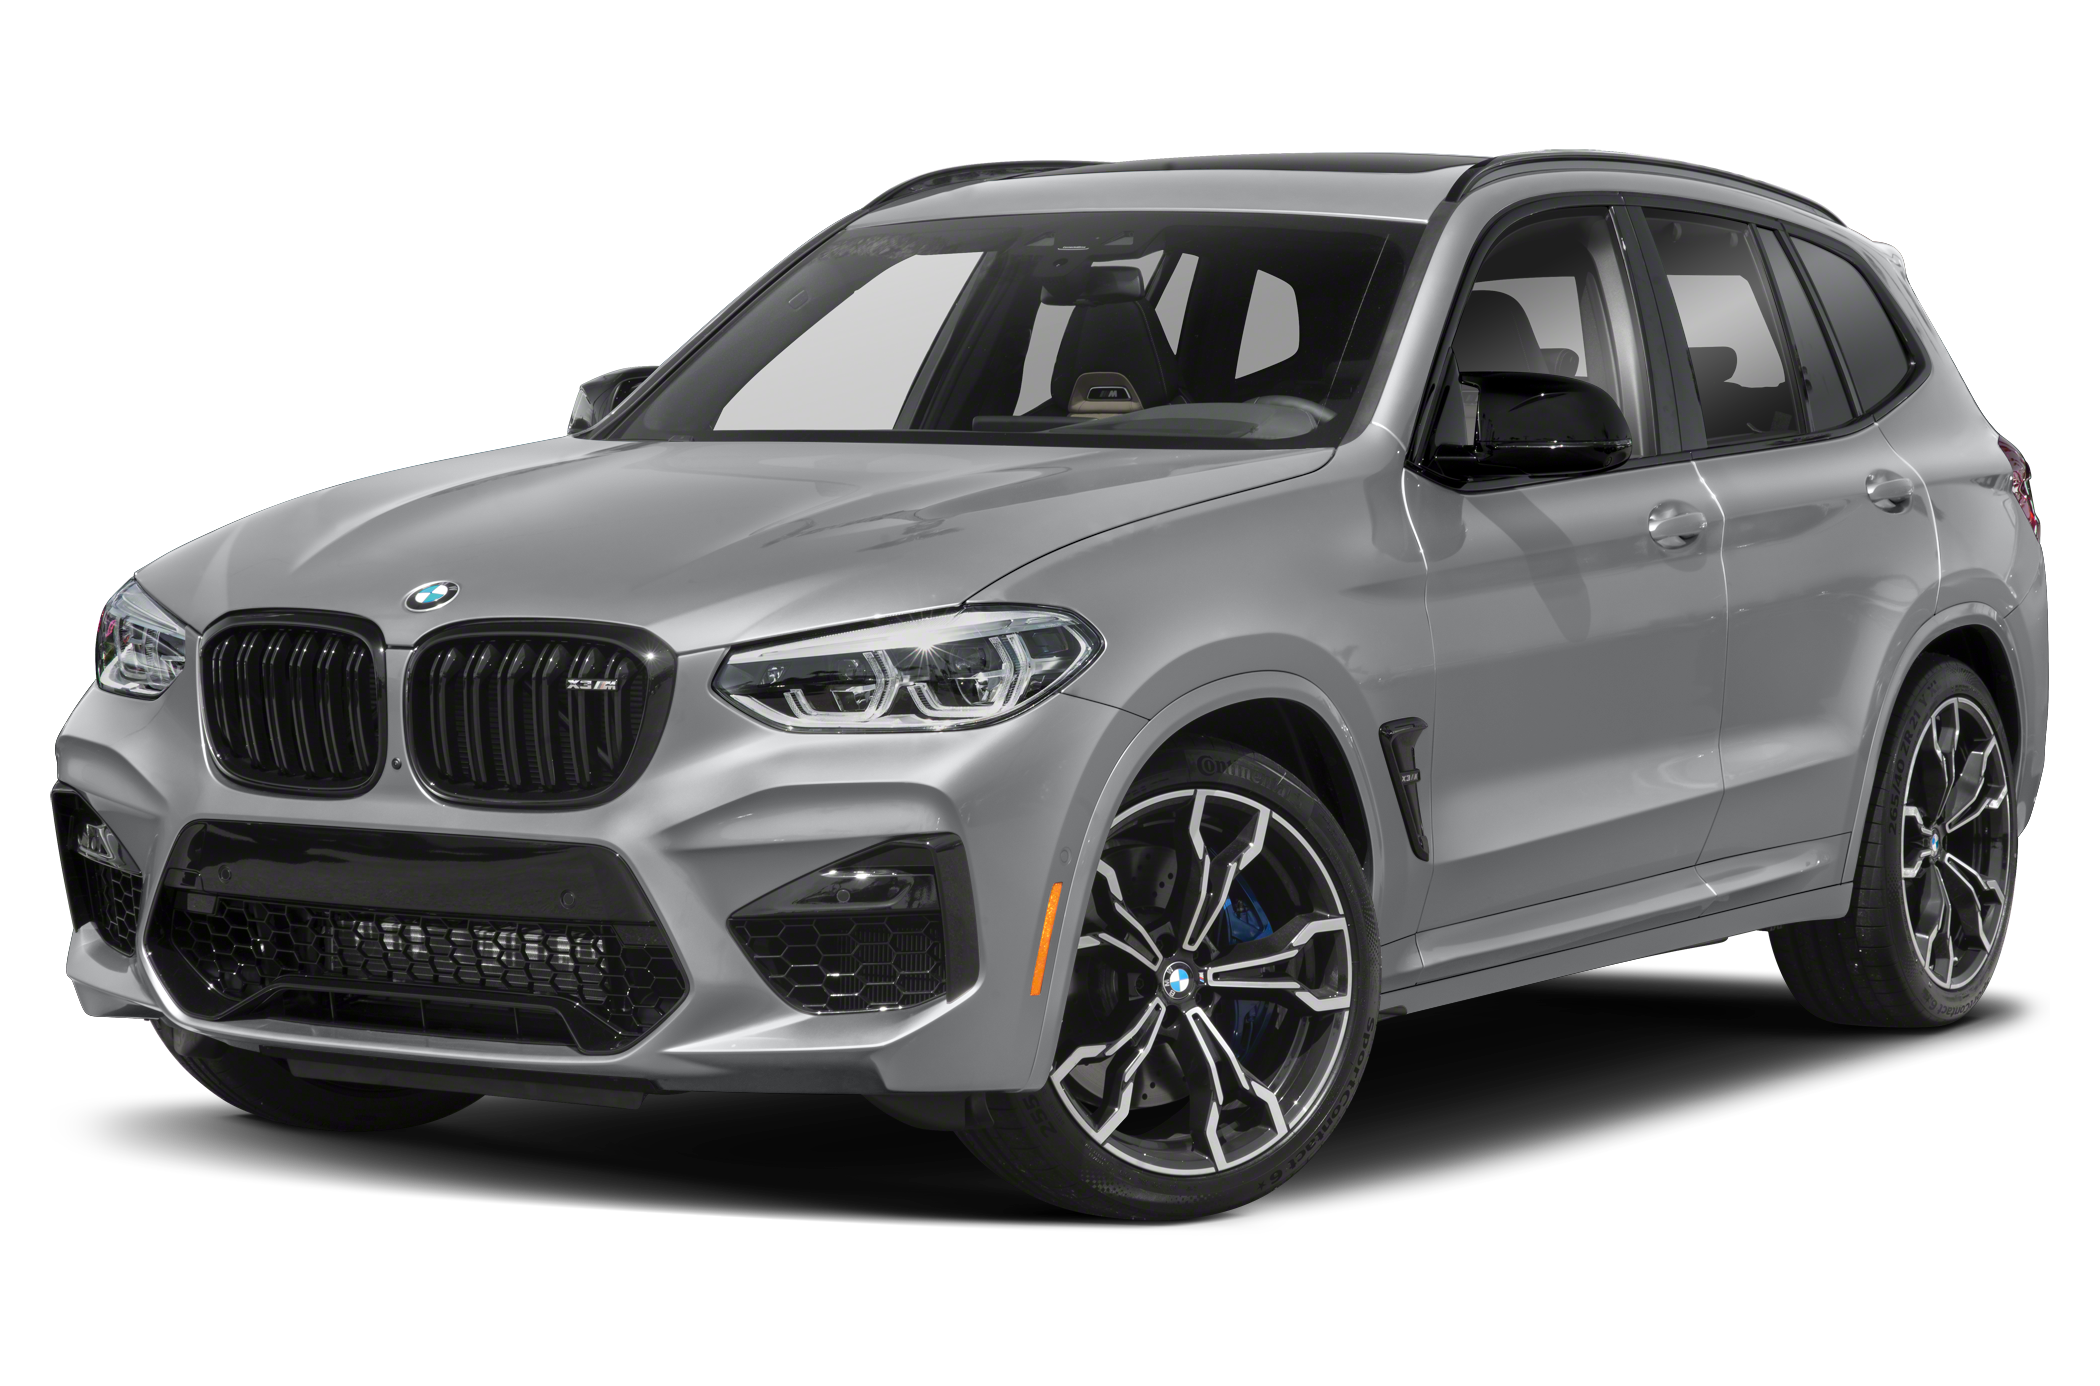  BMW X3 oem parts and accessories on sale